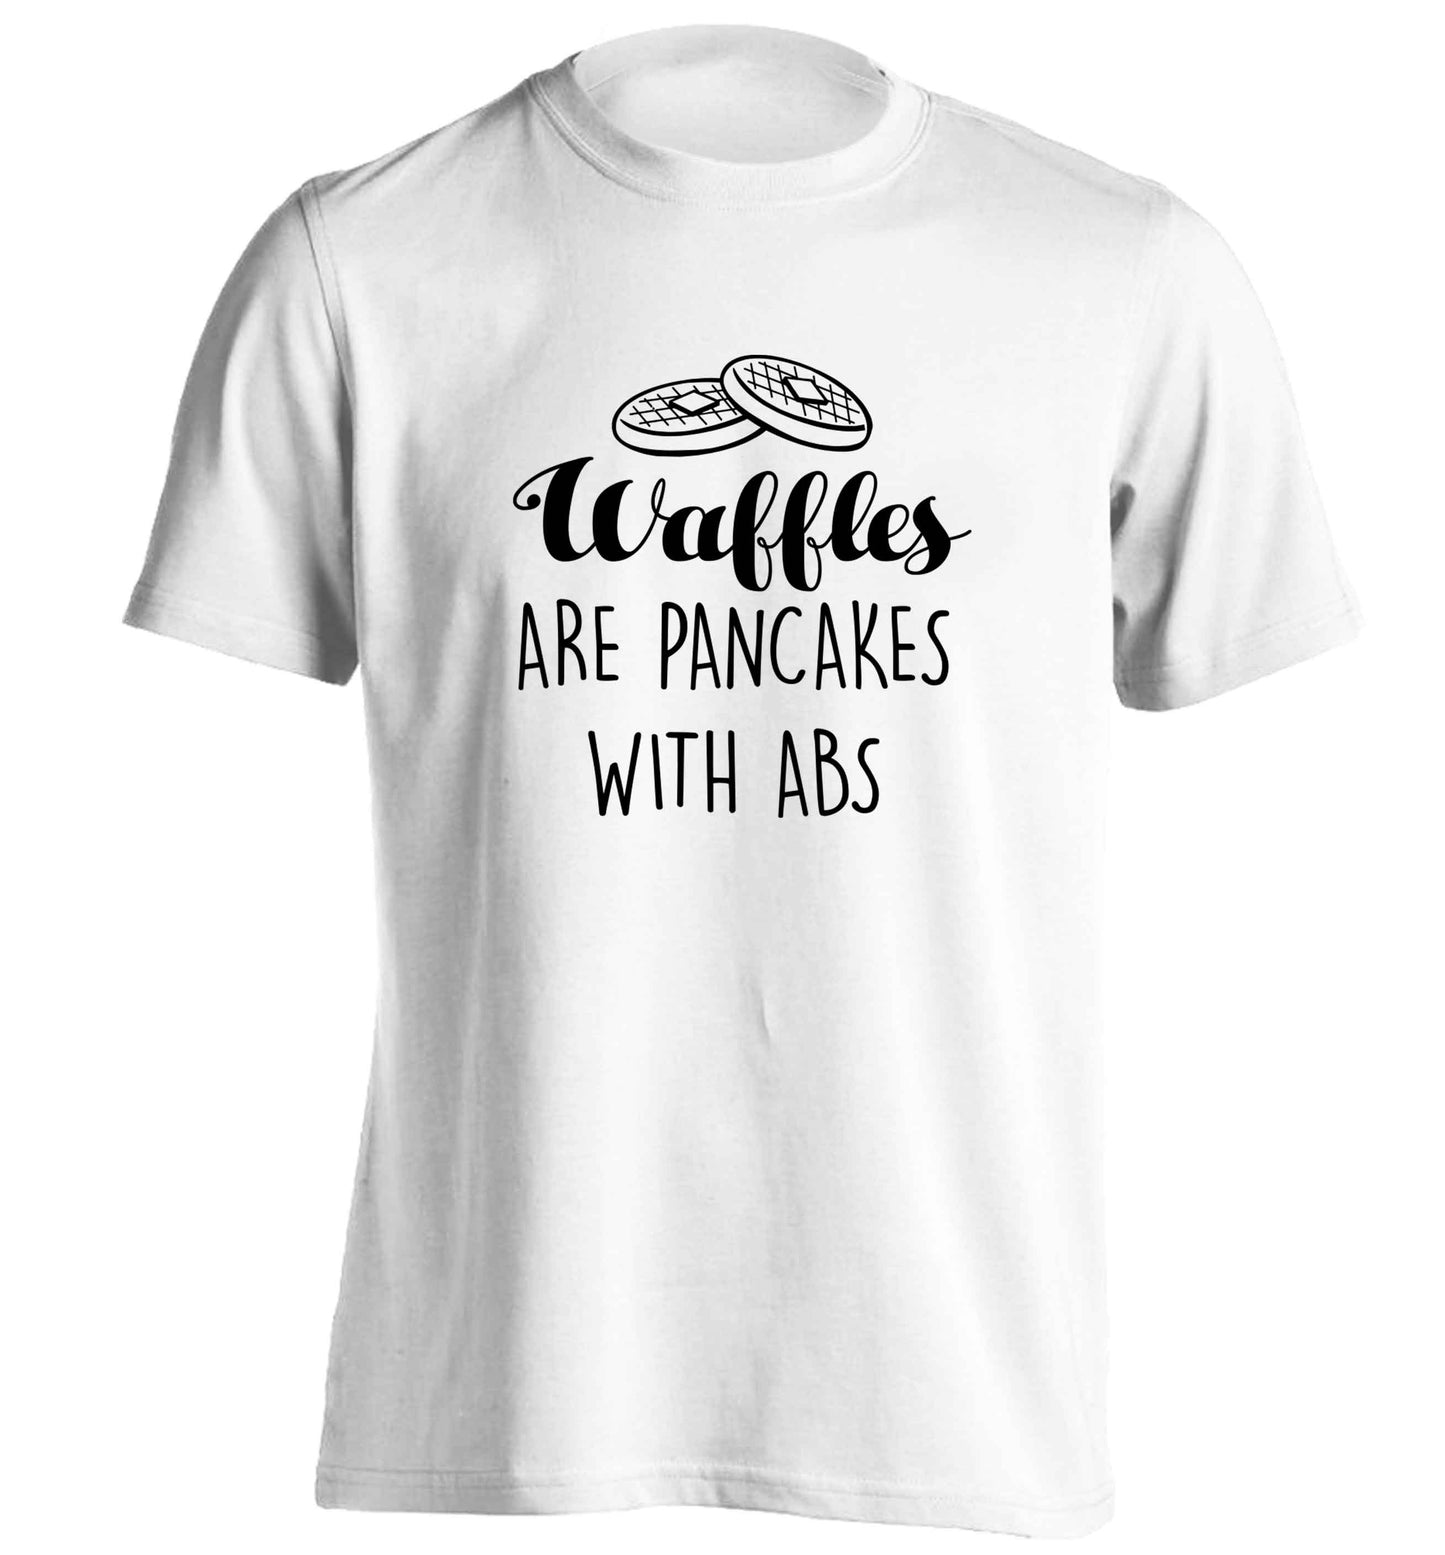 Waffles are just pancakes with abs adults unisex white Tshirt 2XL